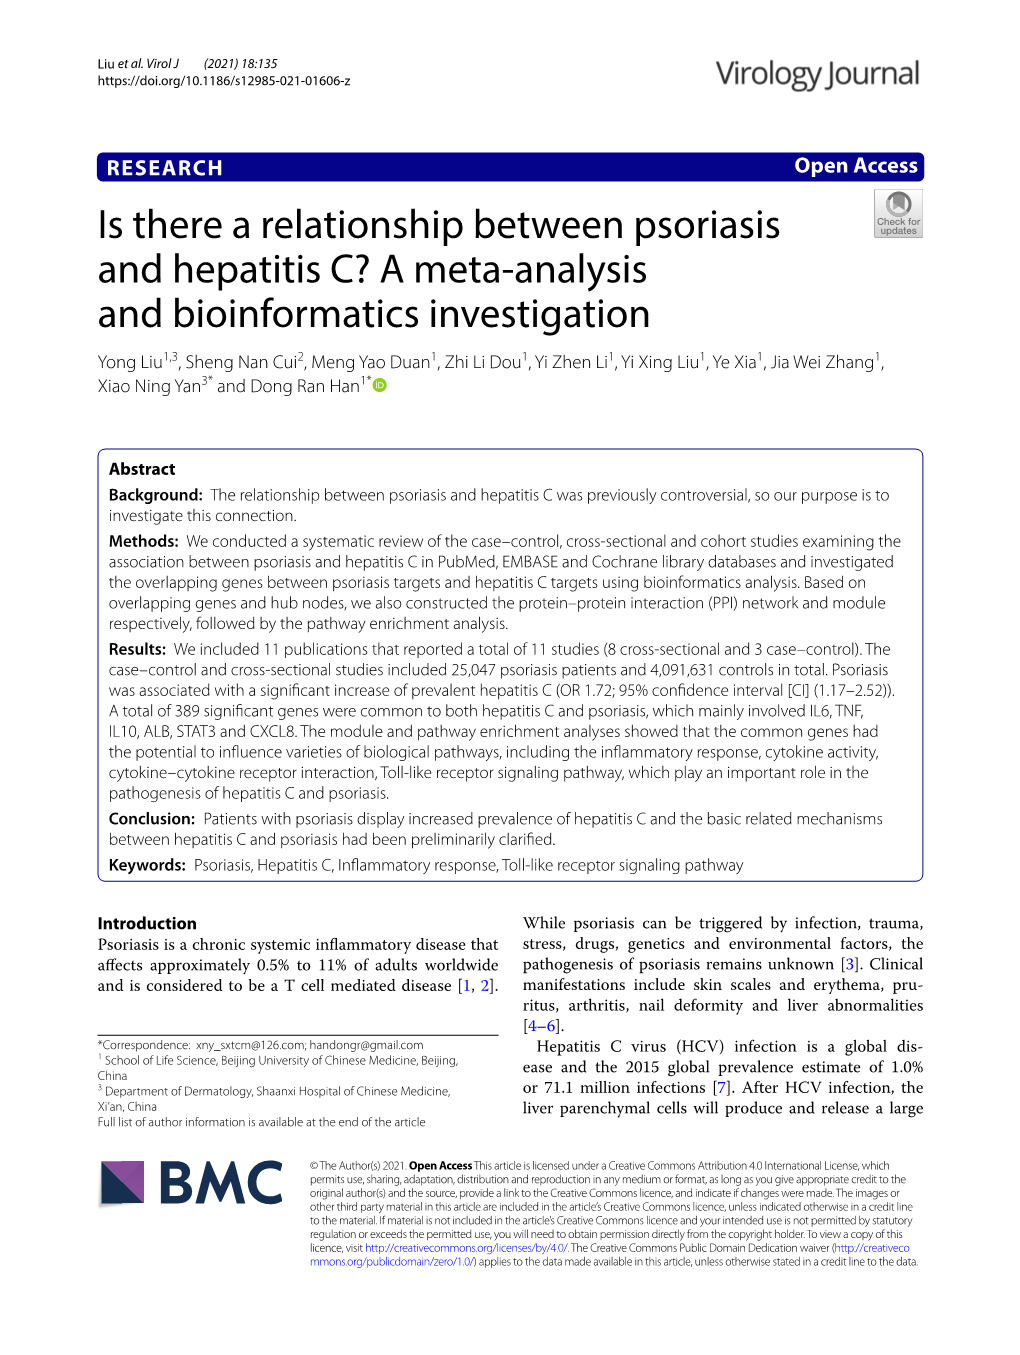 Is There a Relationship Between Psoriasis and Hepatitis C?